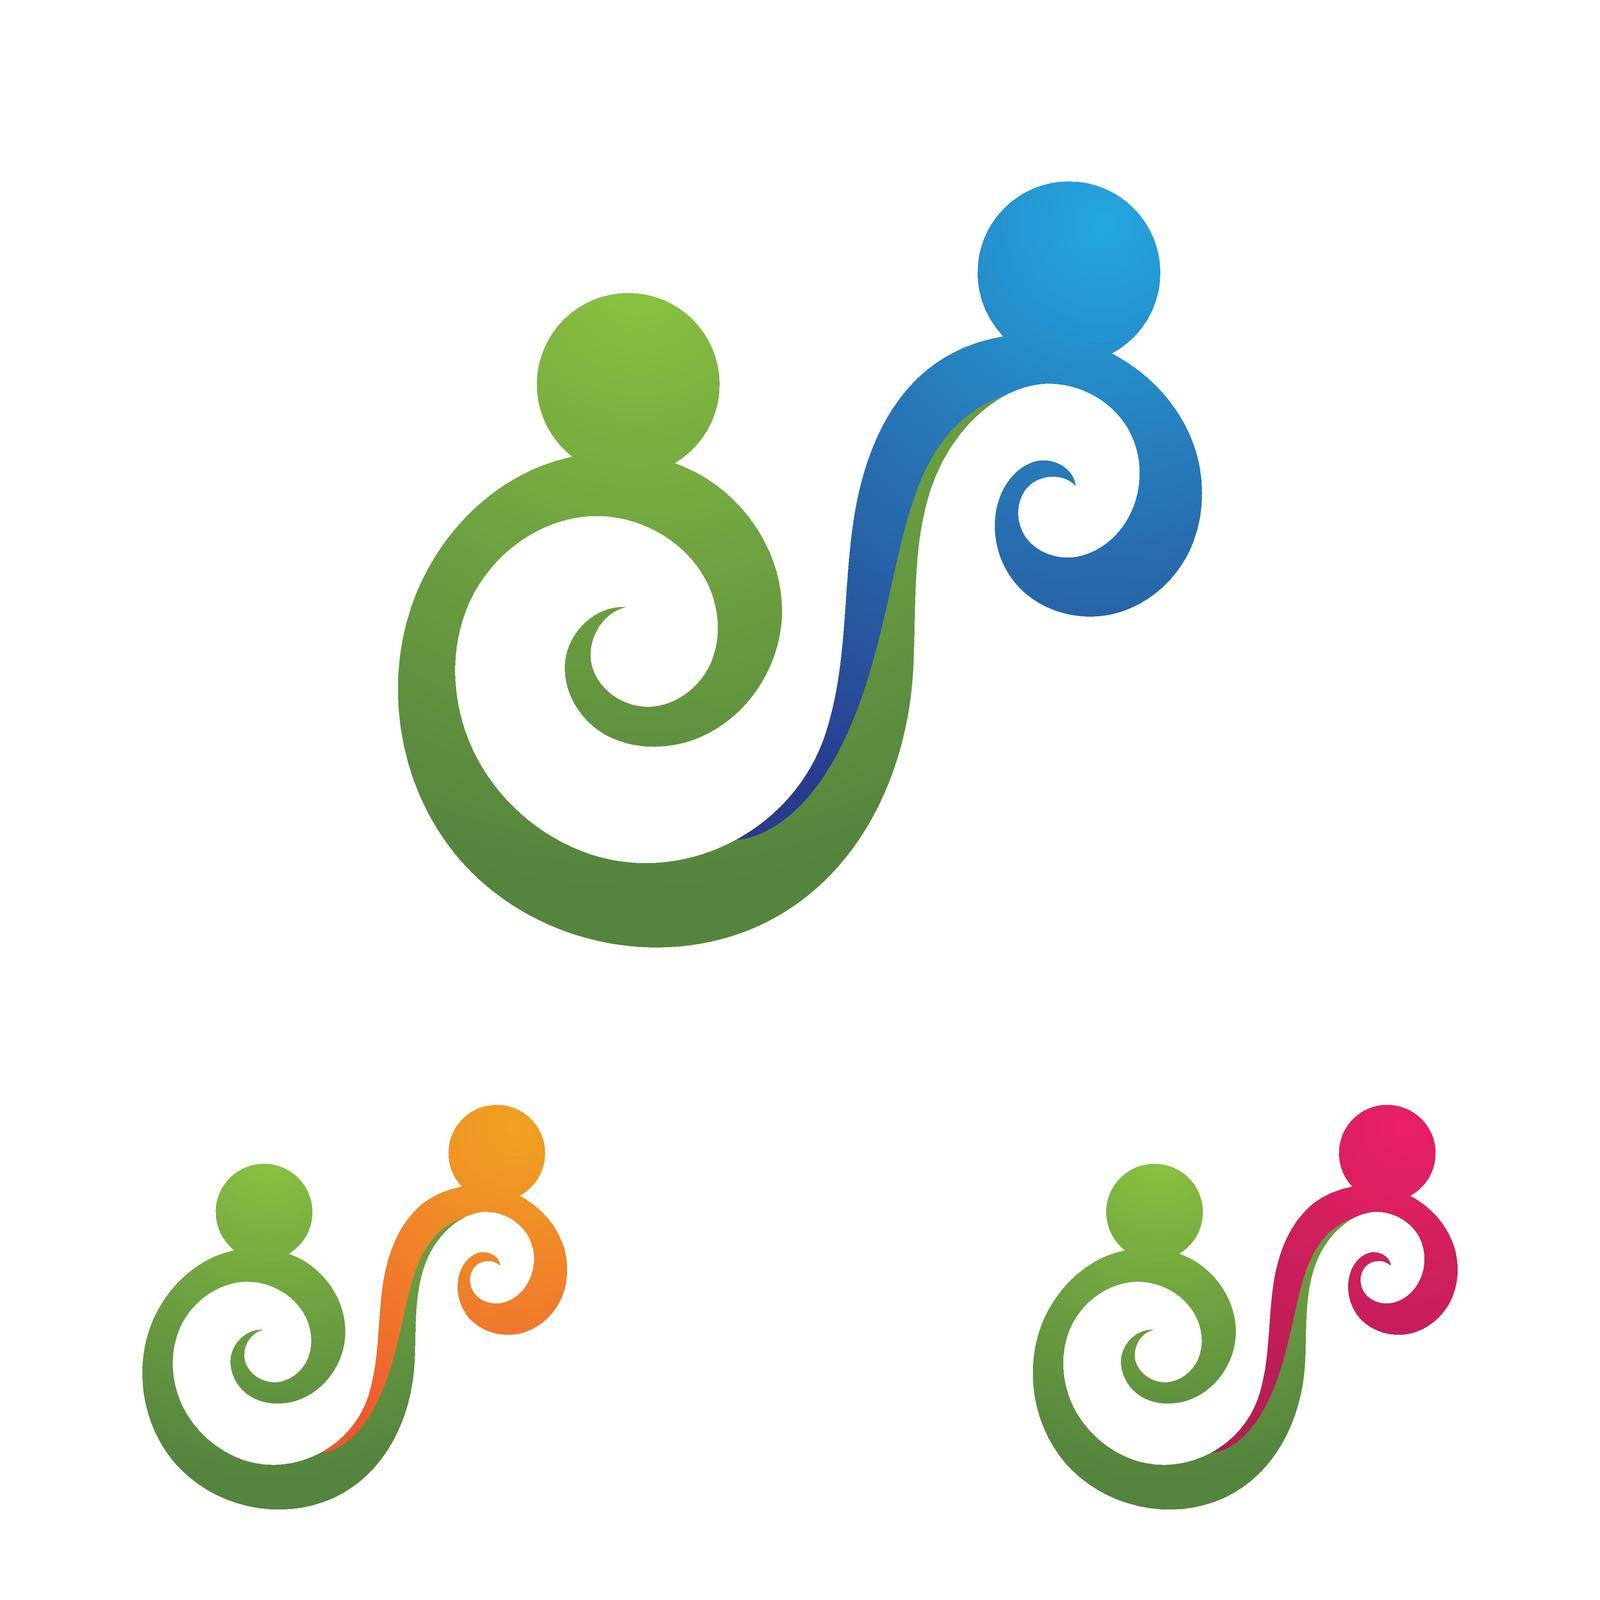 Family care infinity logo vector by Mrsongrphc